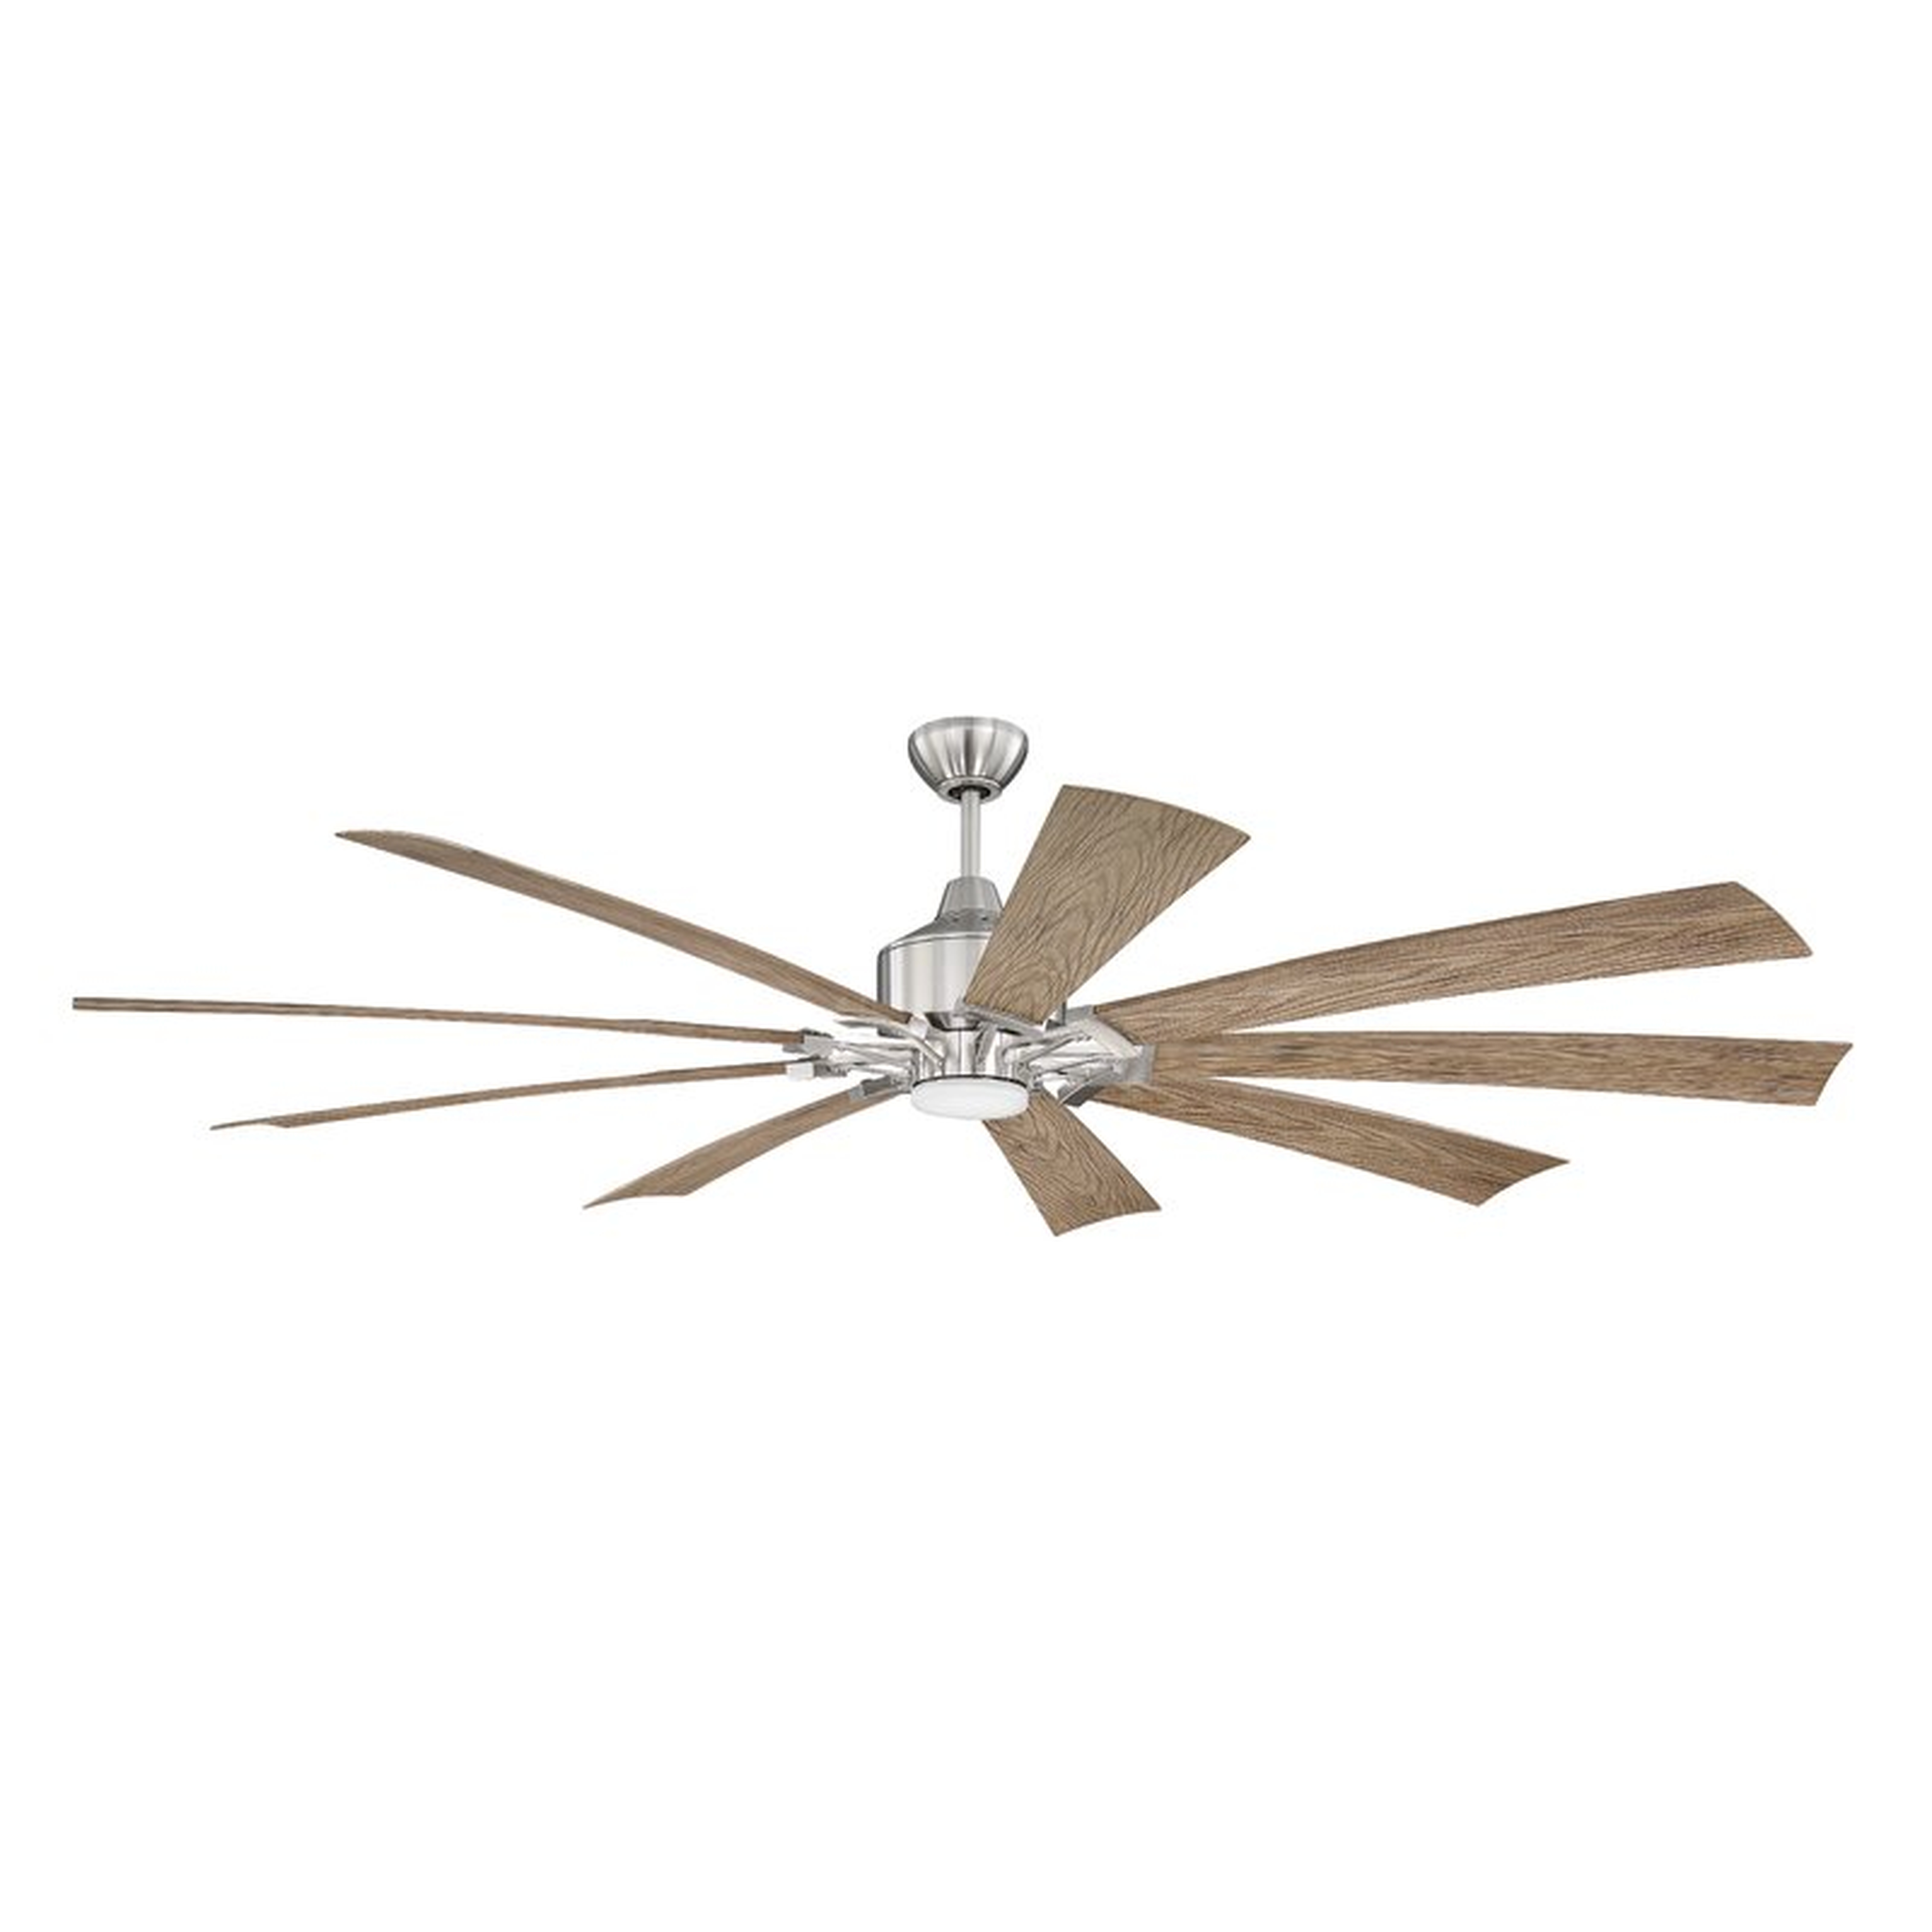 70" Leavitt 9 - Blade LED Windmill Ceiling Fan with Remote Control and Light Kit Included - Wayfair